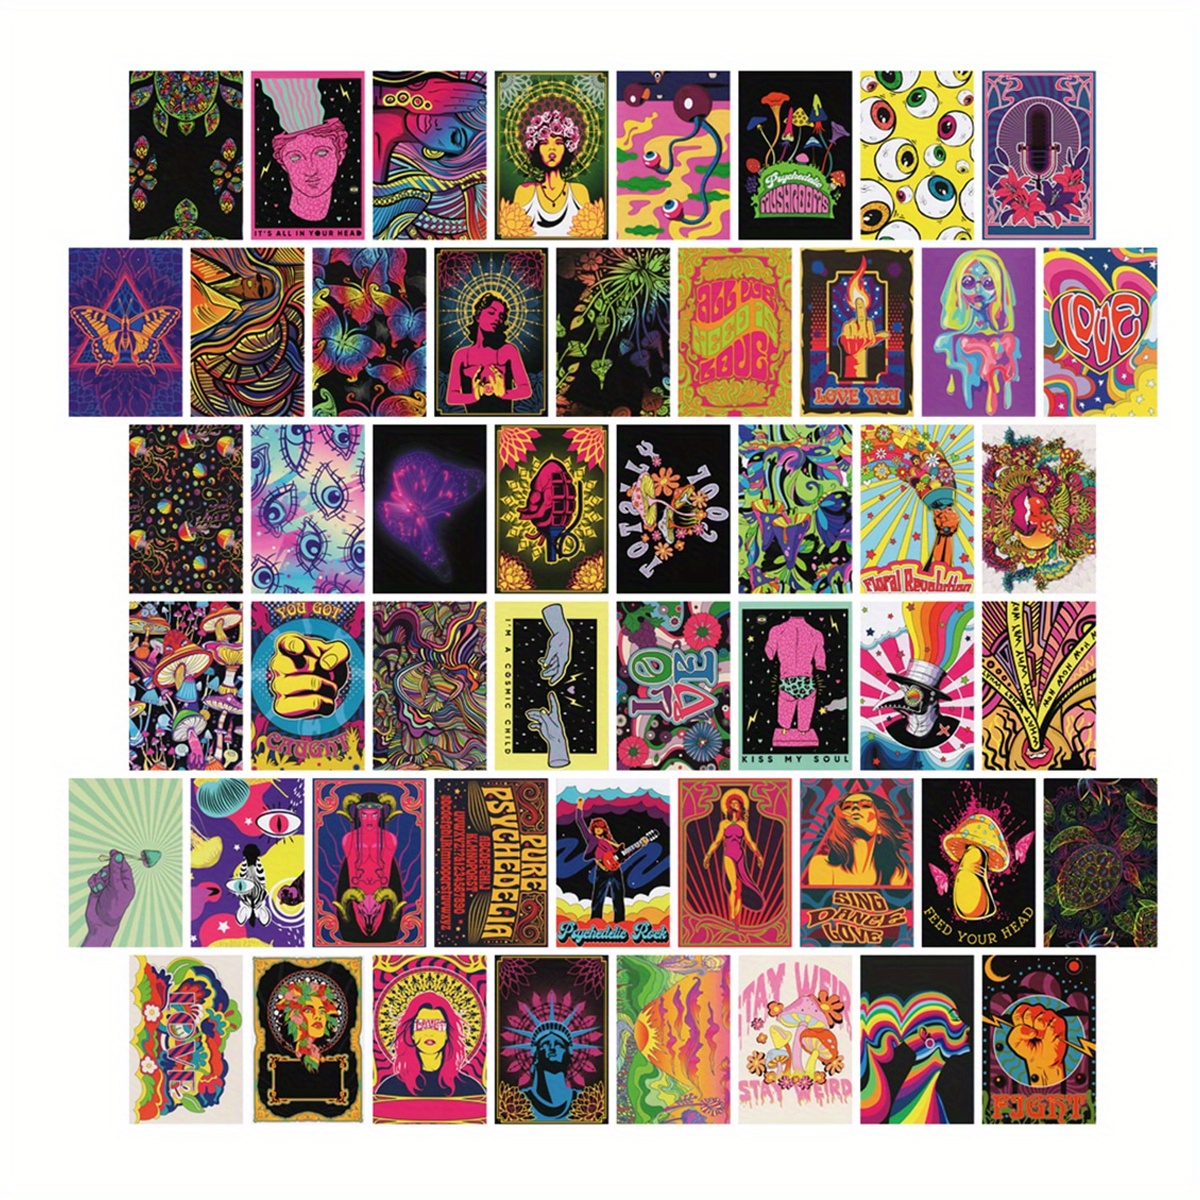 Indie poster pack Hippie aesthetic Wall collage kit 6x4